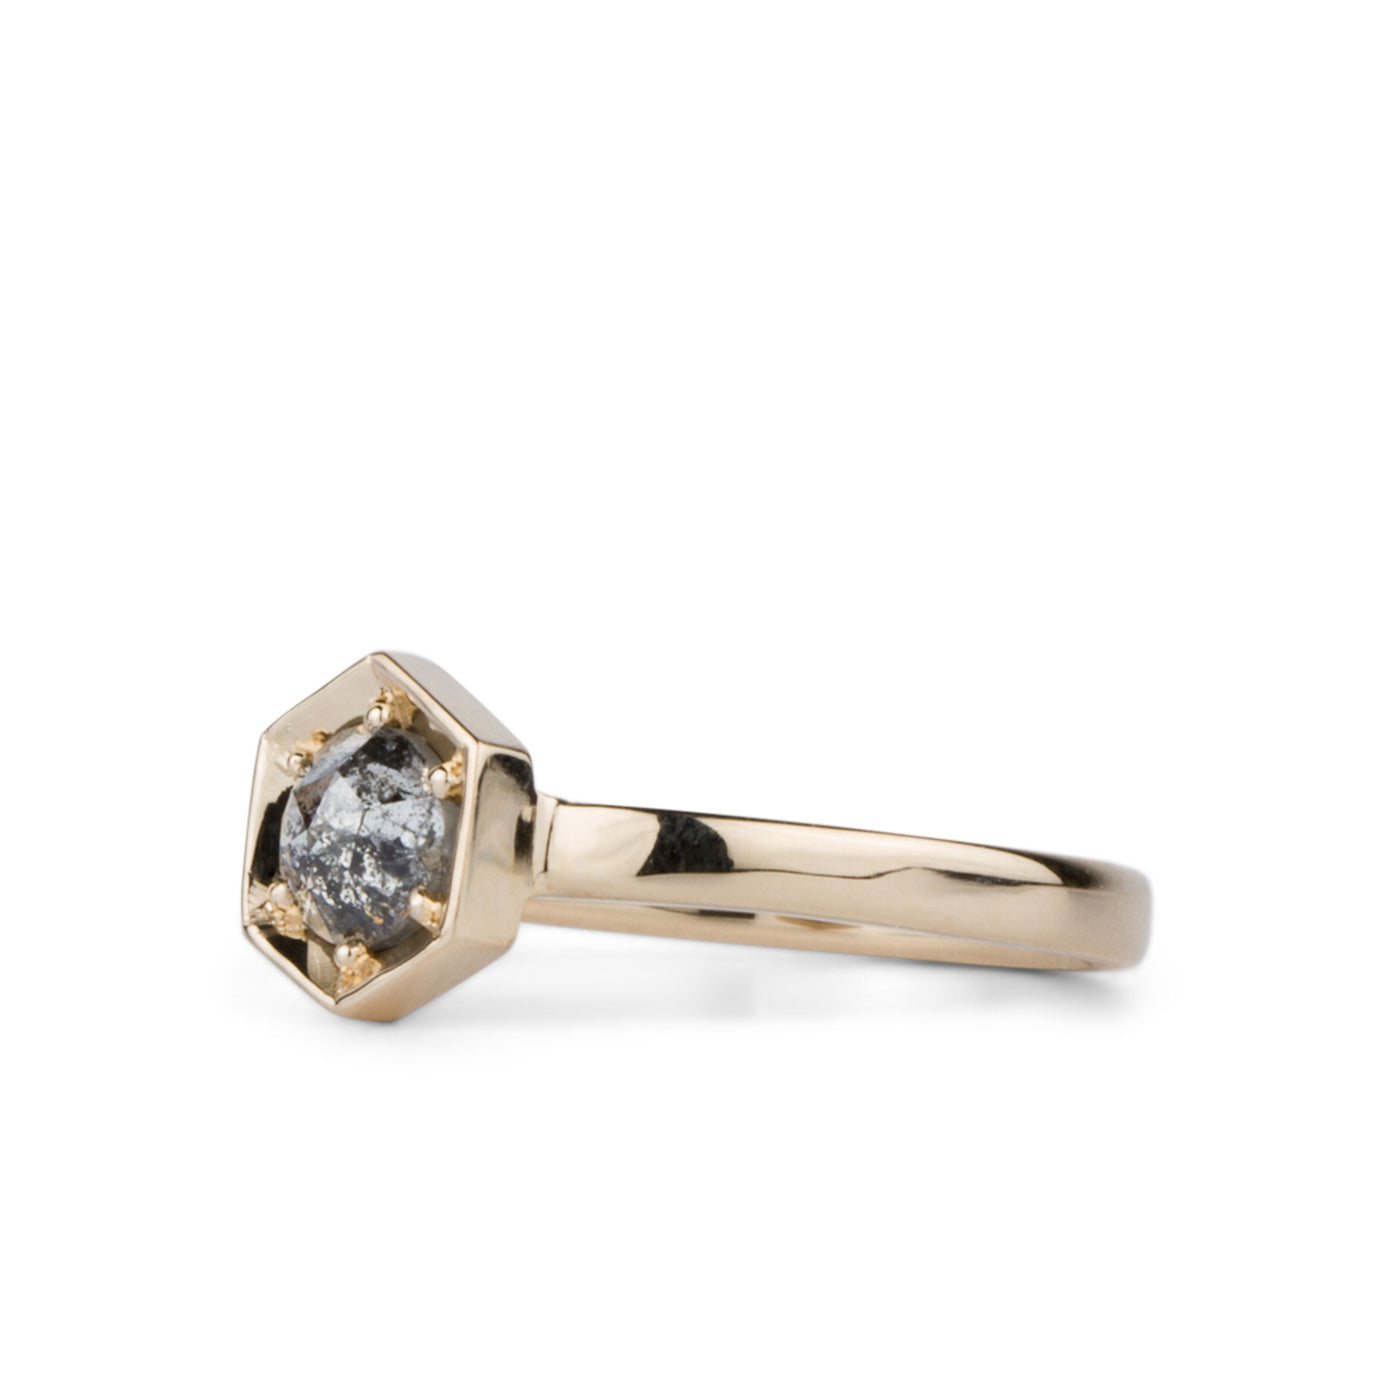 Lofted Issa Ring with Salt and Pepper Rose Cut Diamond side view on a white background by Corey Egan